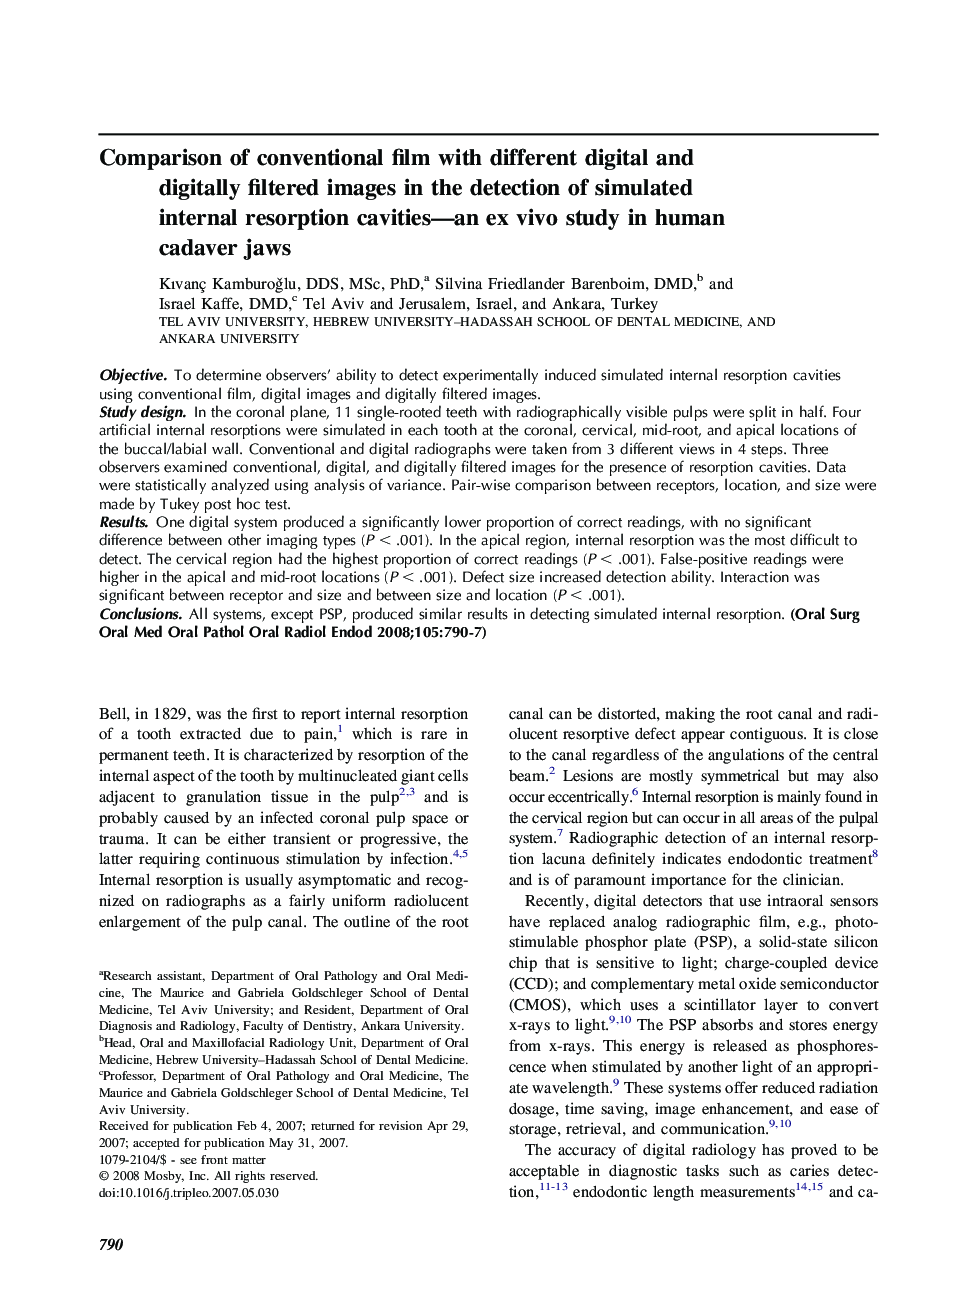 Comparison of conventional film with different digital and digitally filtered images in the detection of simulated internal resorption cavities—an ex vivo study in human cadaver jaws